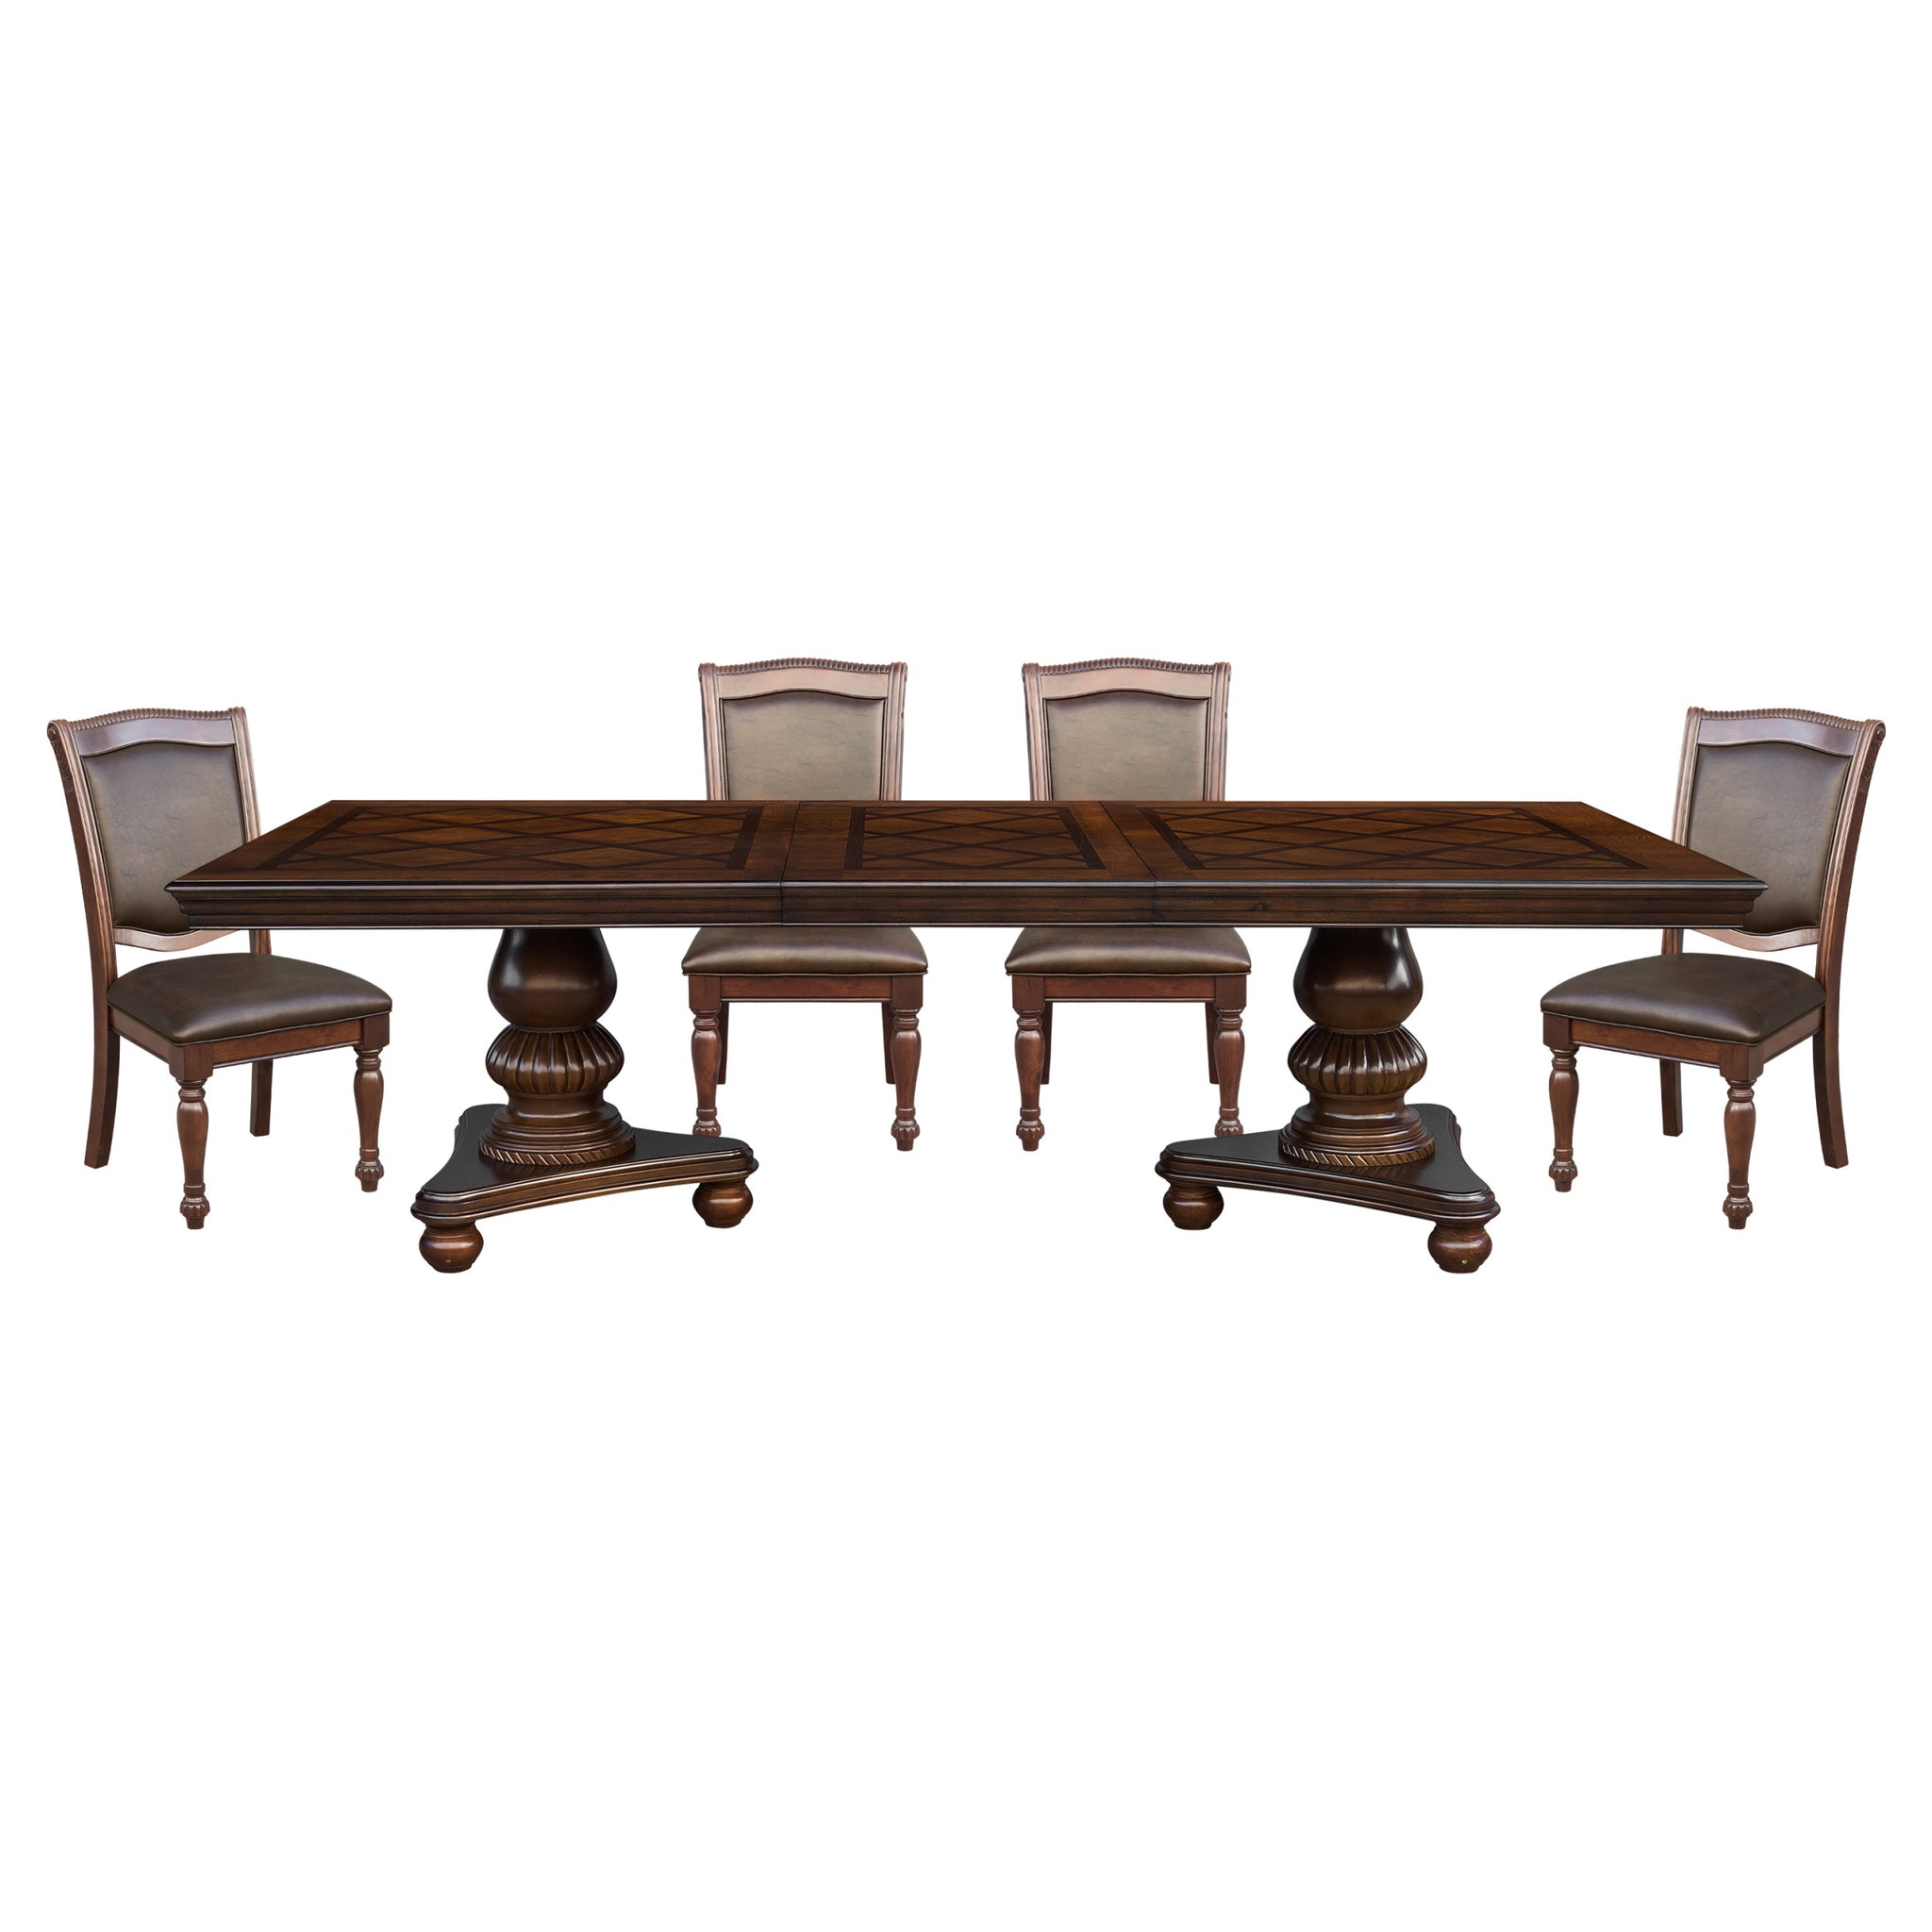 Traditional Style Dining Room Table w Leaf and 4x Side wood-wood-brown mix-seats 4-wood-dining